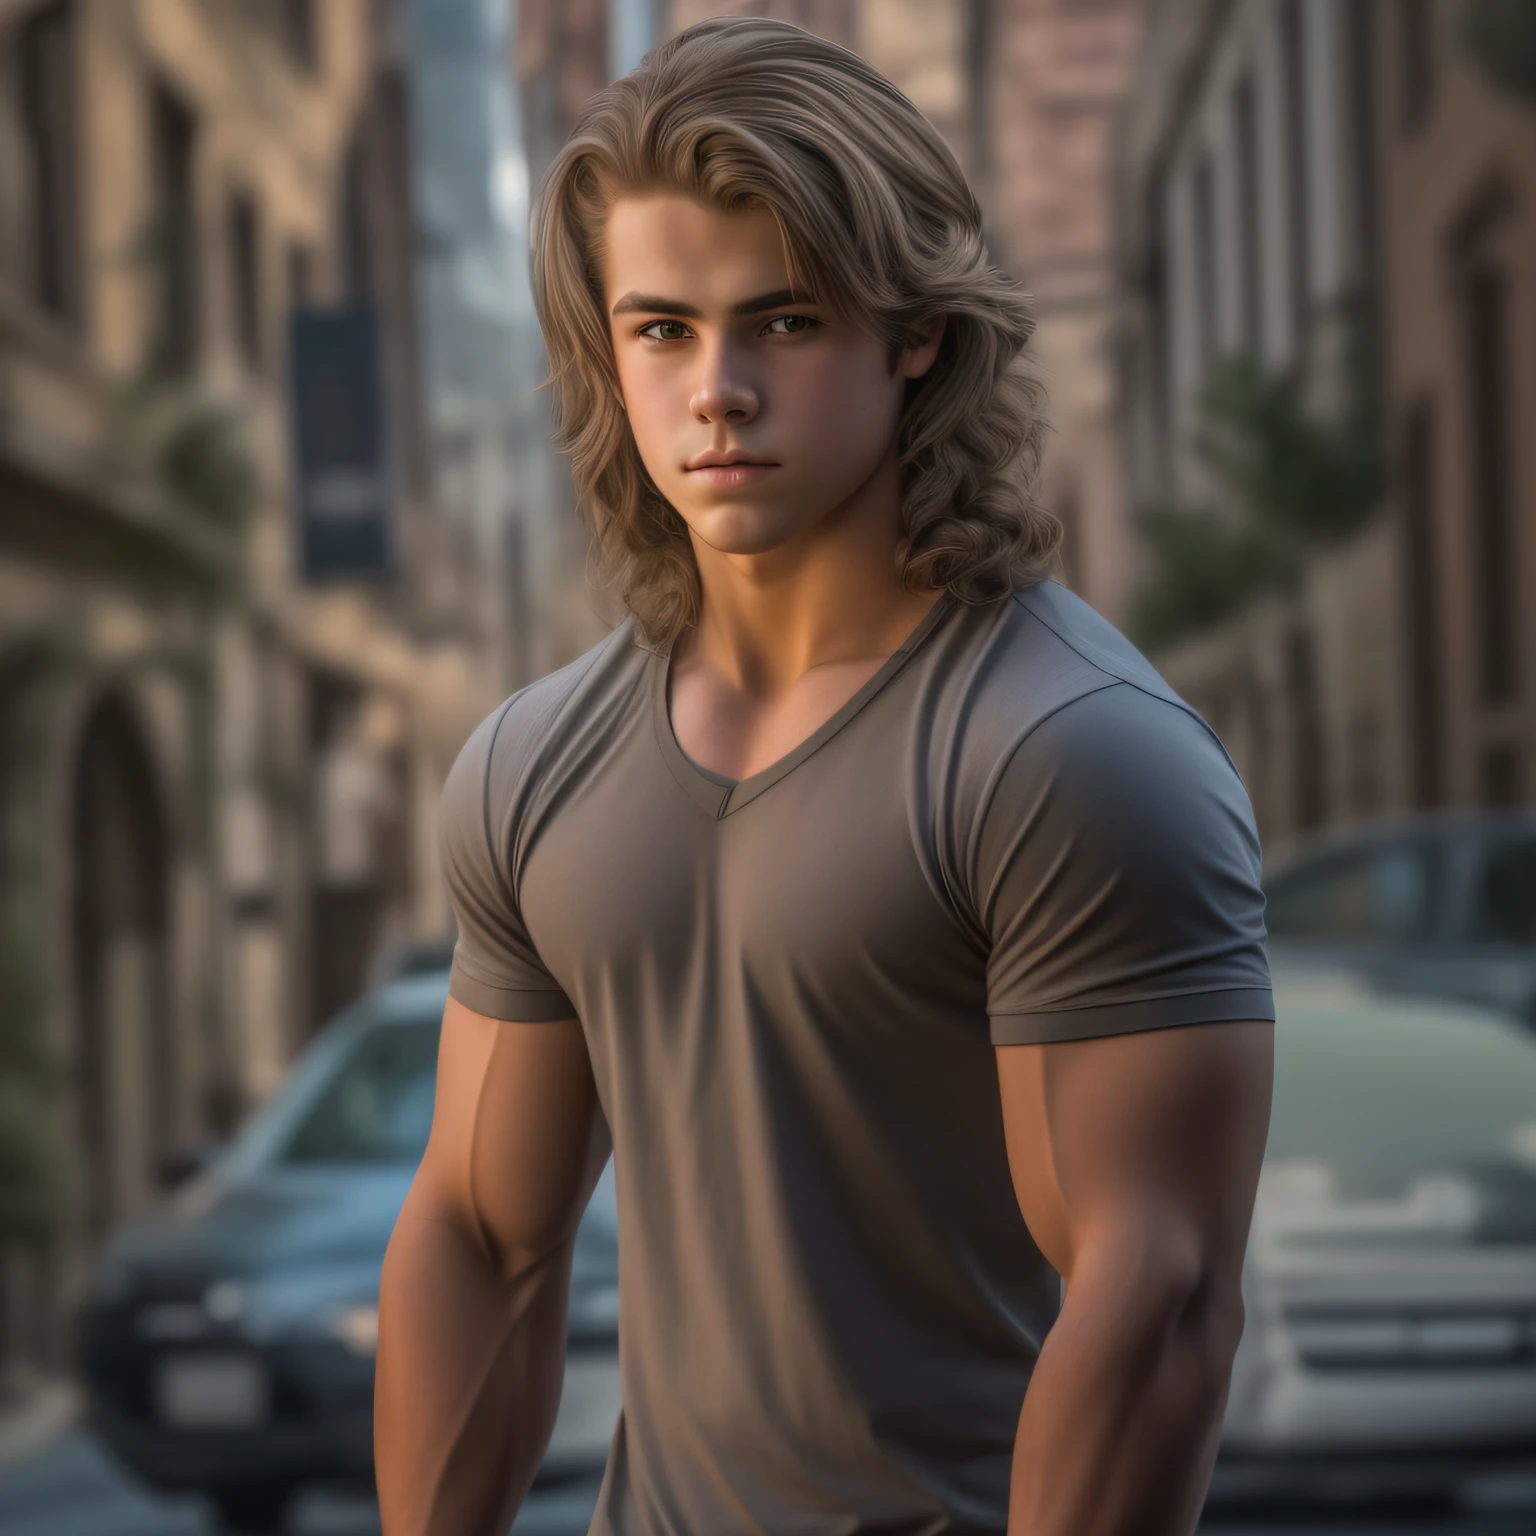 An 18-year-old boy jock bully, embodying the perfect fusion of Joey Lawrence and Cody Calafiore with long hair, exuding a smug and arrogant aura. Enhanced with HDR technology, this image depicts a true masterpiece, 4K resolution, in the style of Ken Haak